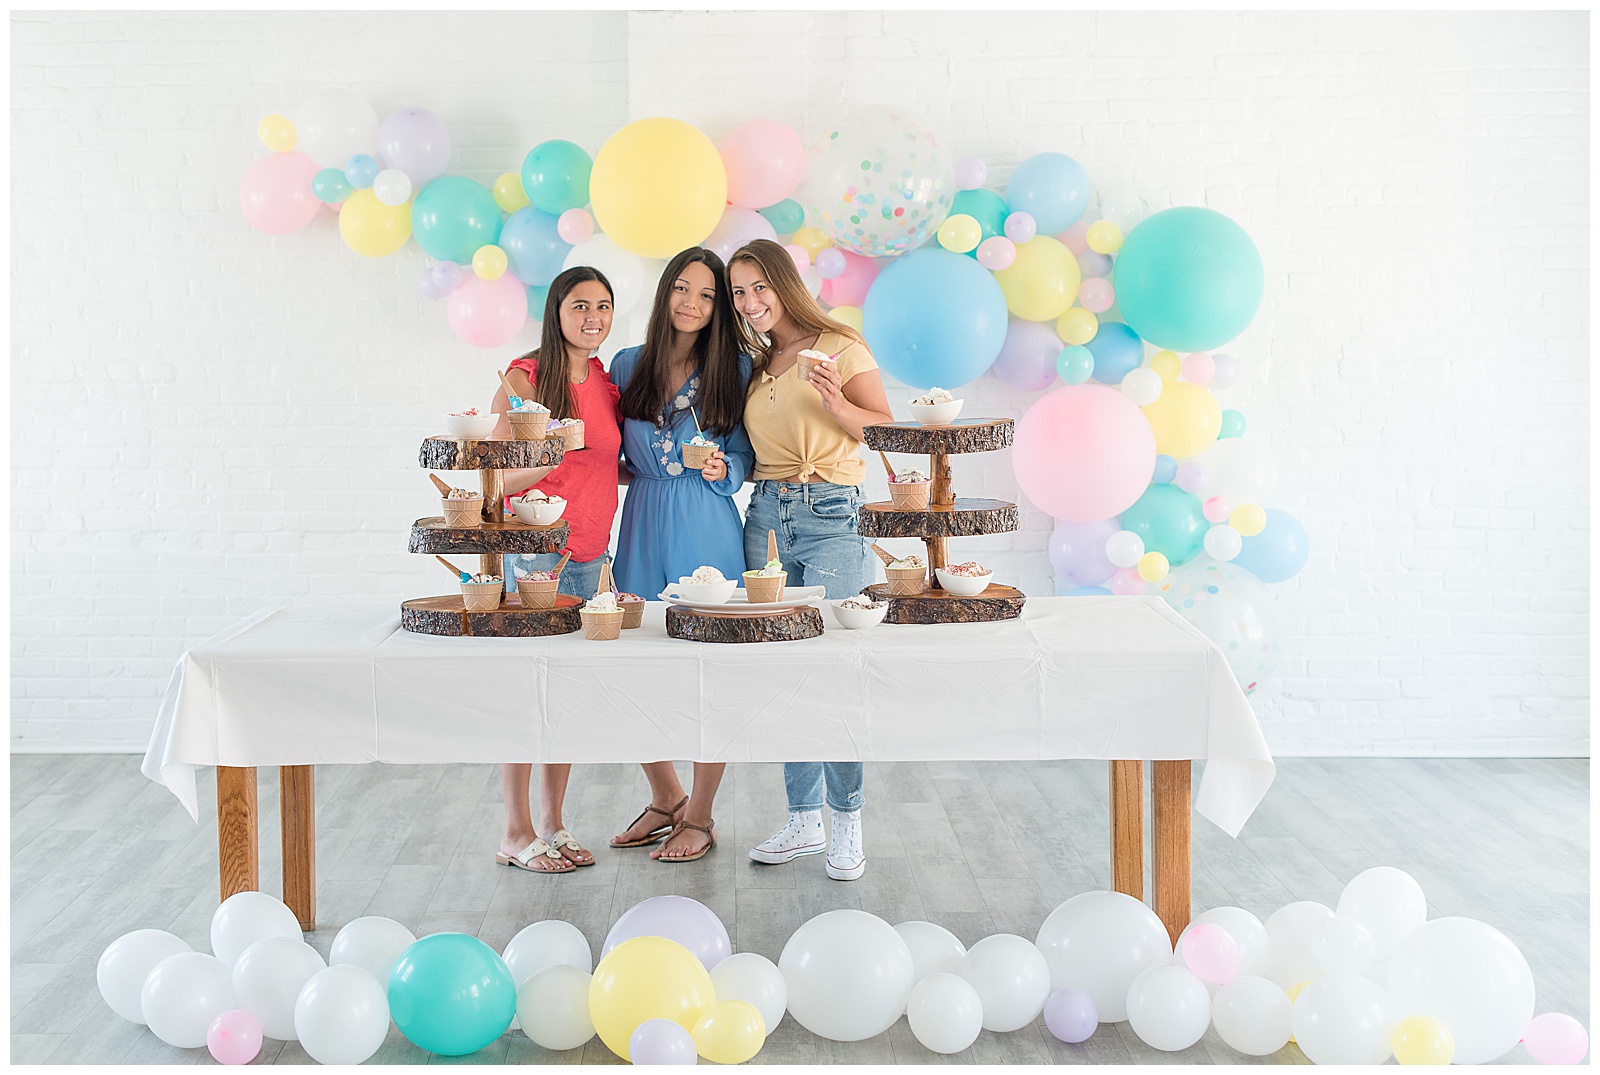 senior spokesmodels standing behind table of ice cream with ballons hanging on wall behind